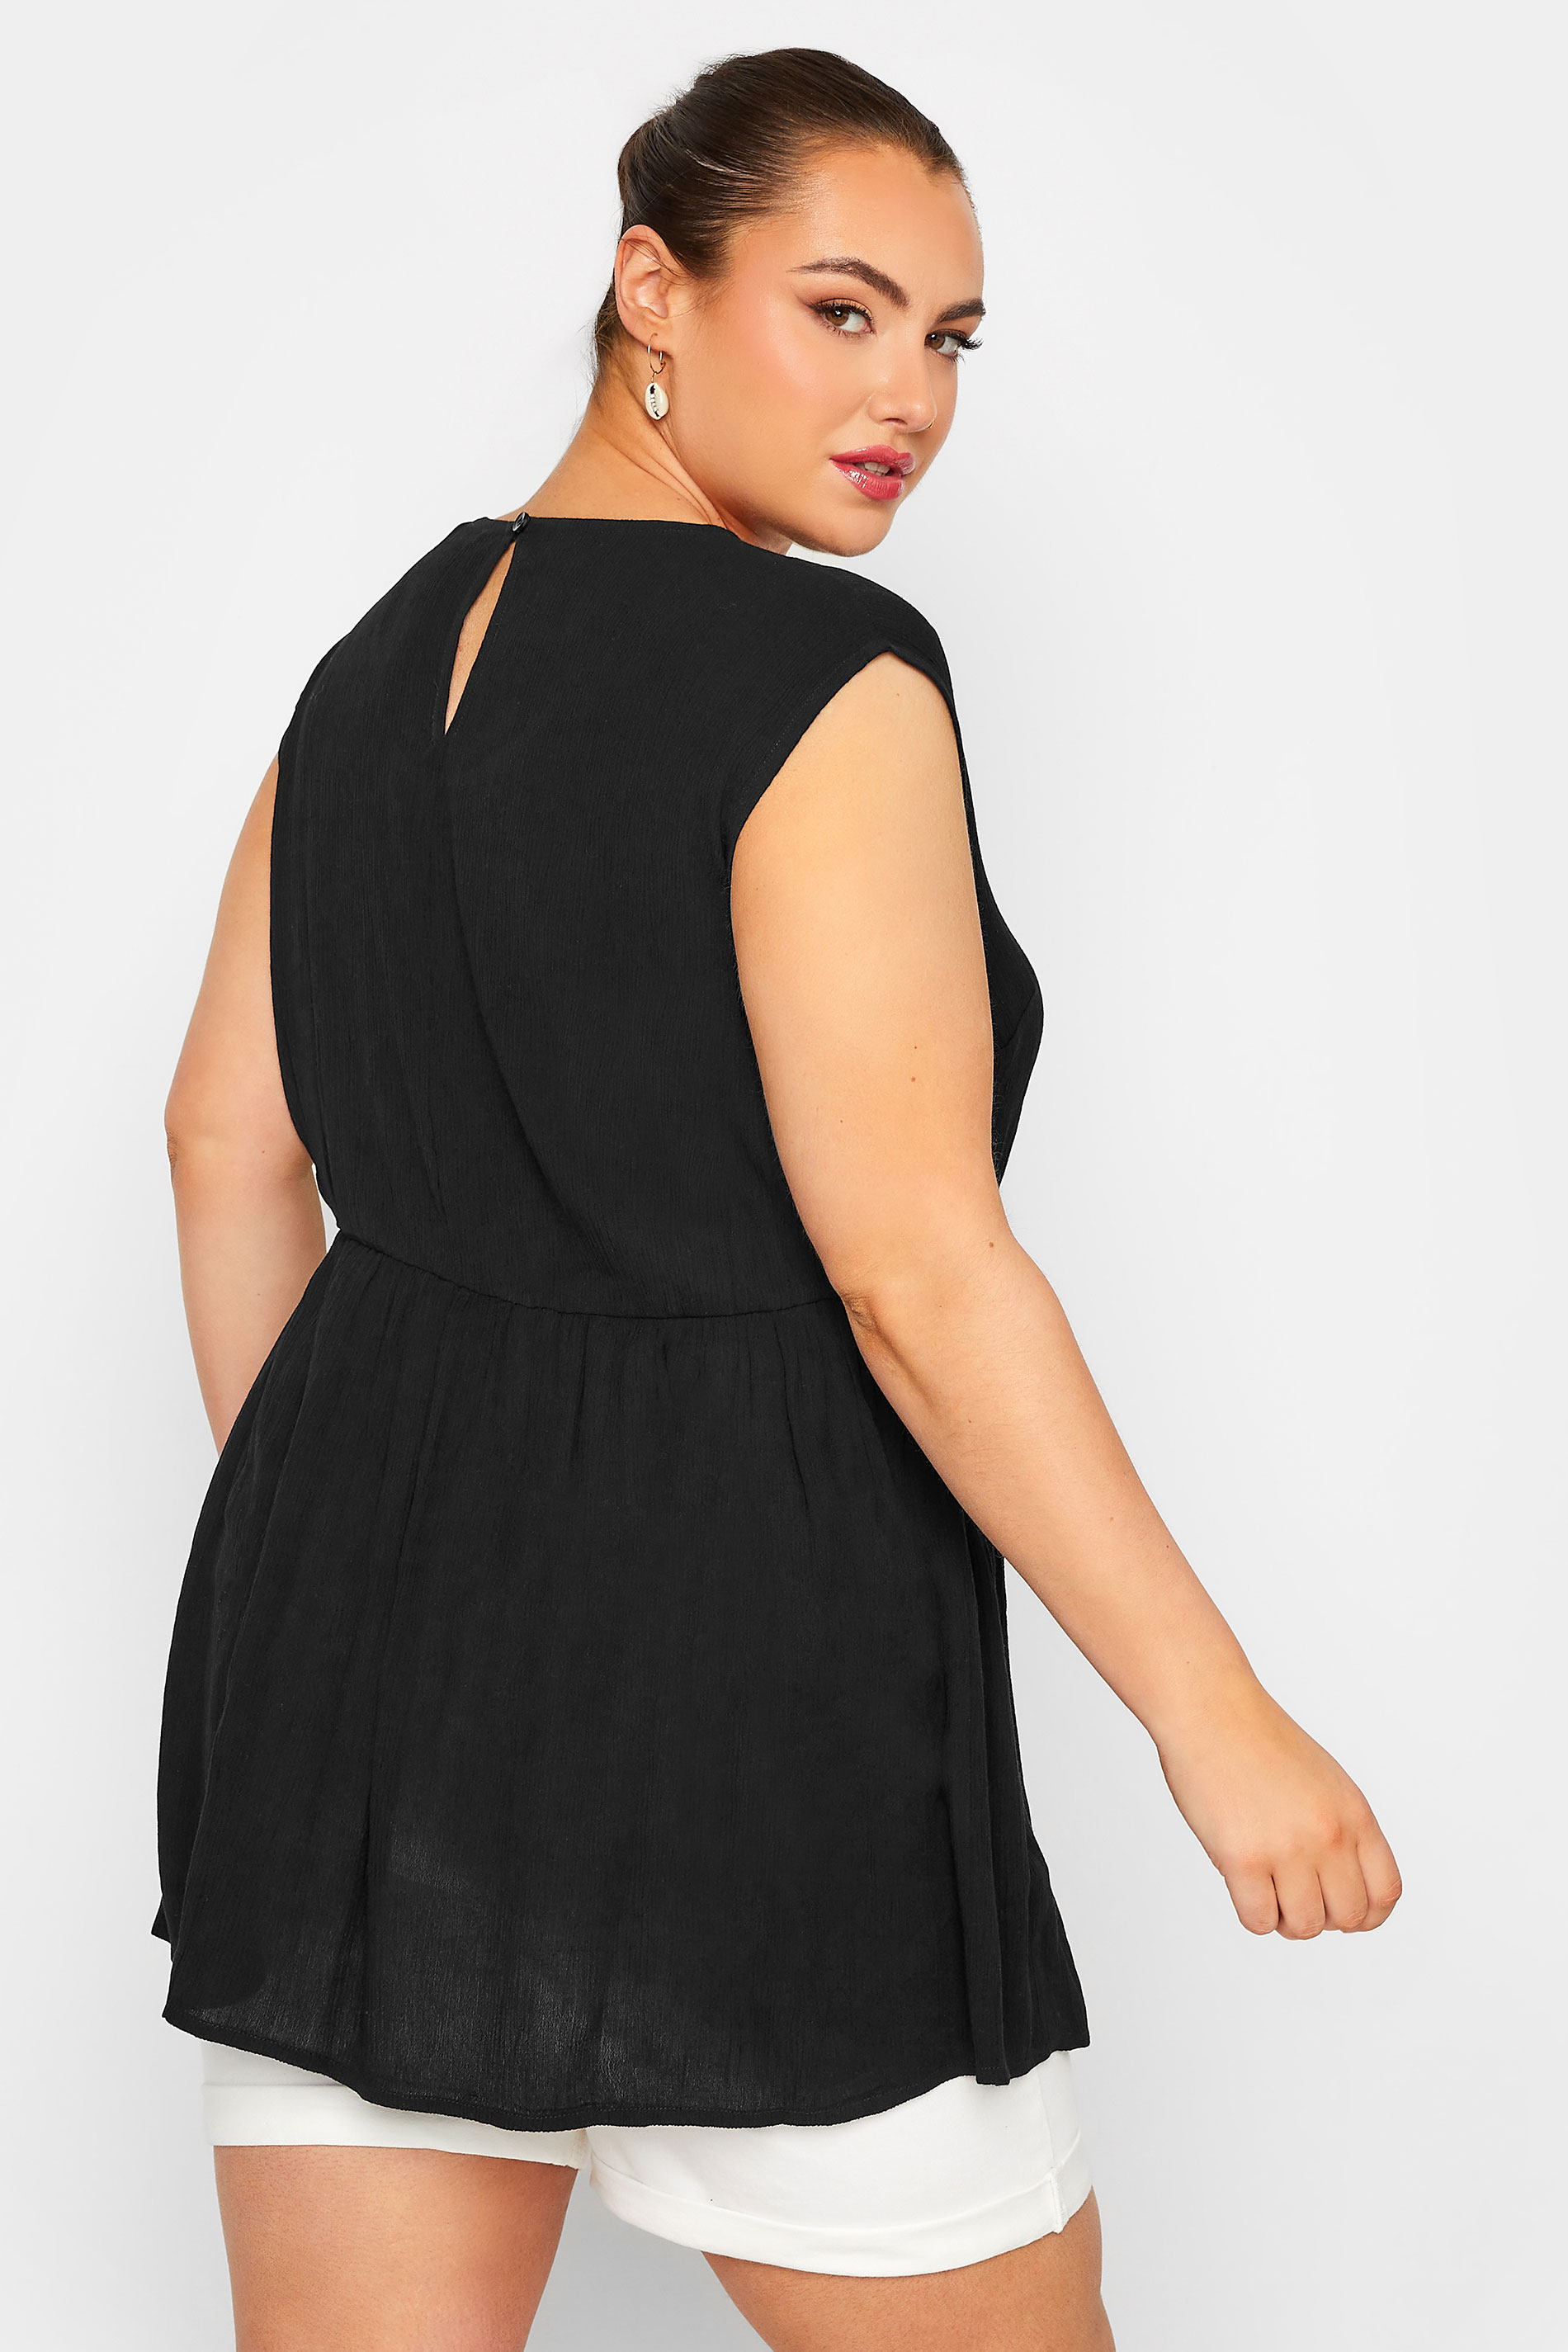 LIMITED COLLECTION Plus Size Black Crinkle Boxy Peplum Vest Top | Yours Clothing 3